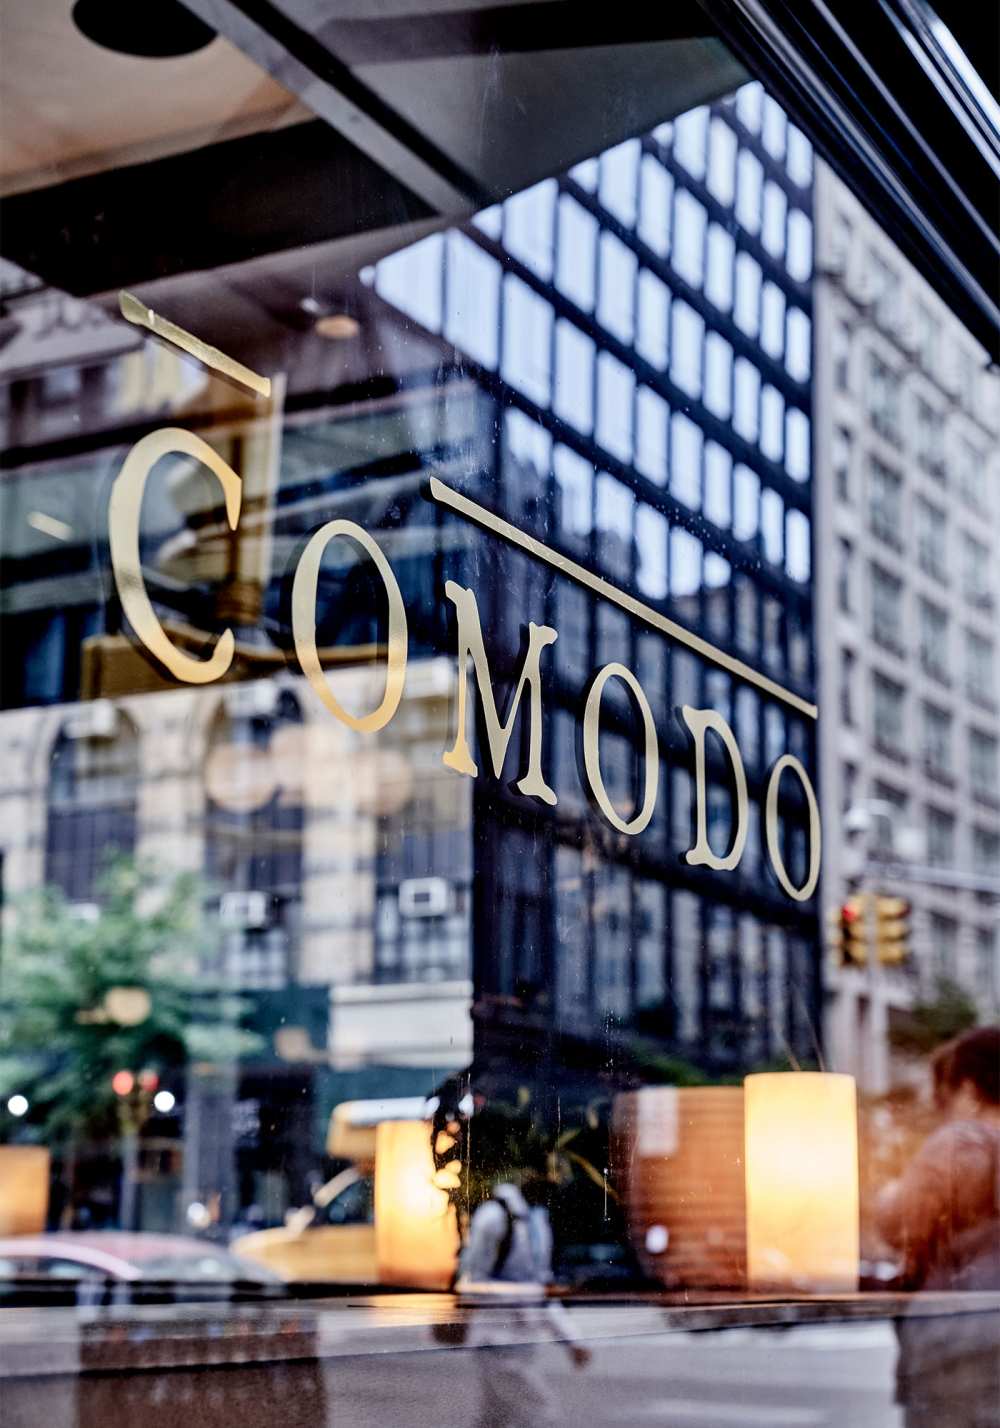 Freehand New York’s Comodo Promises Romantic V-Day Dining Experience